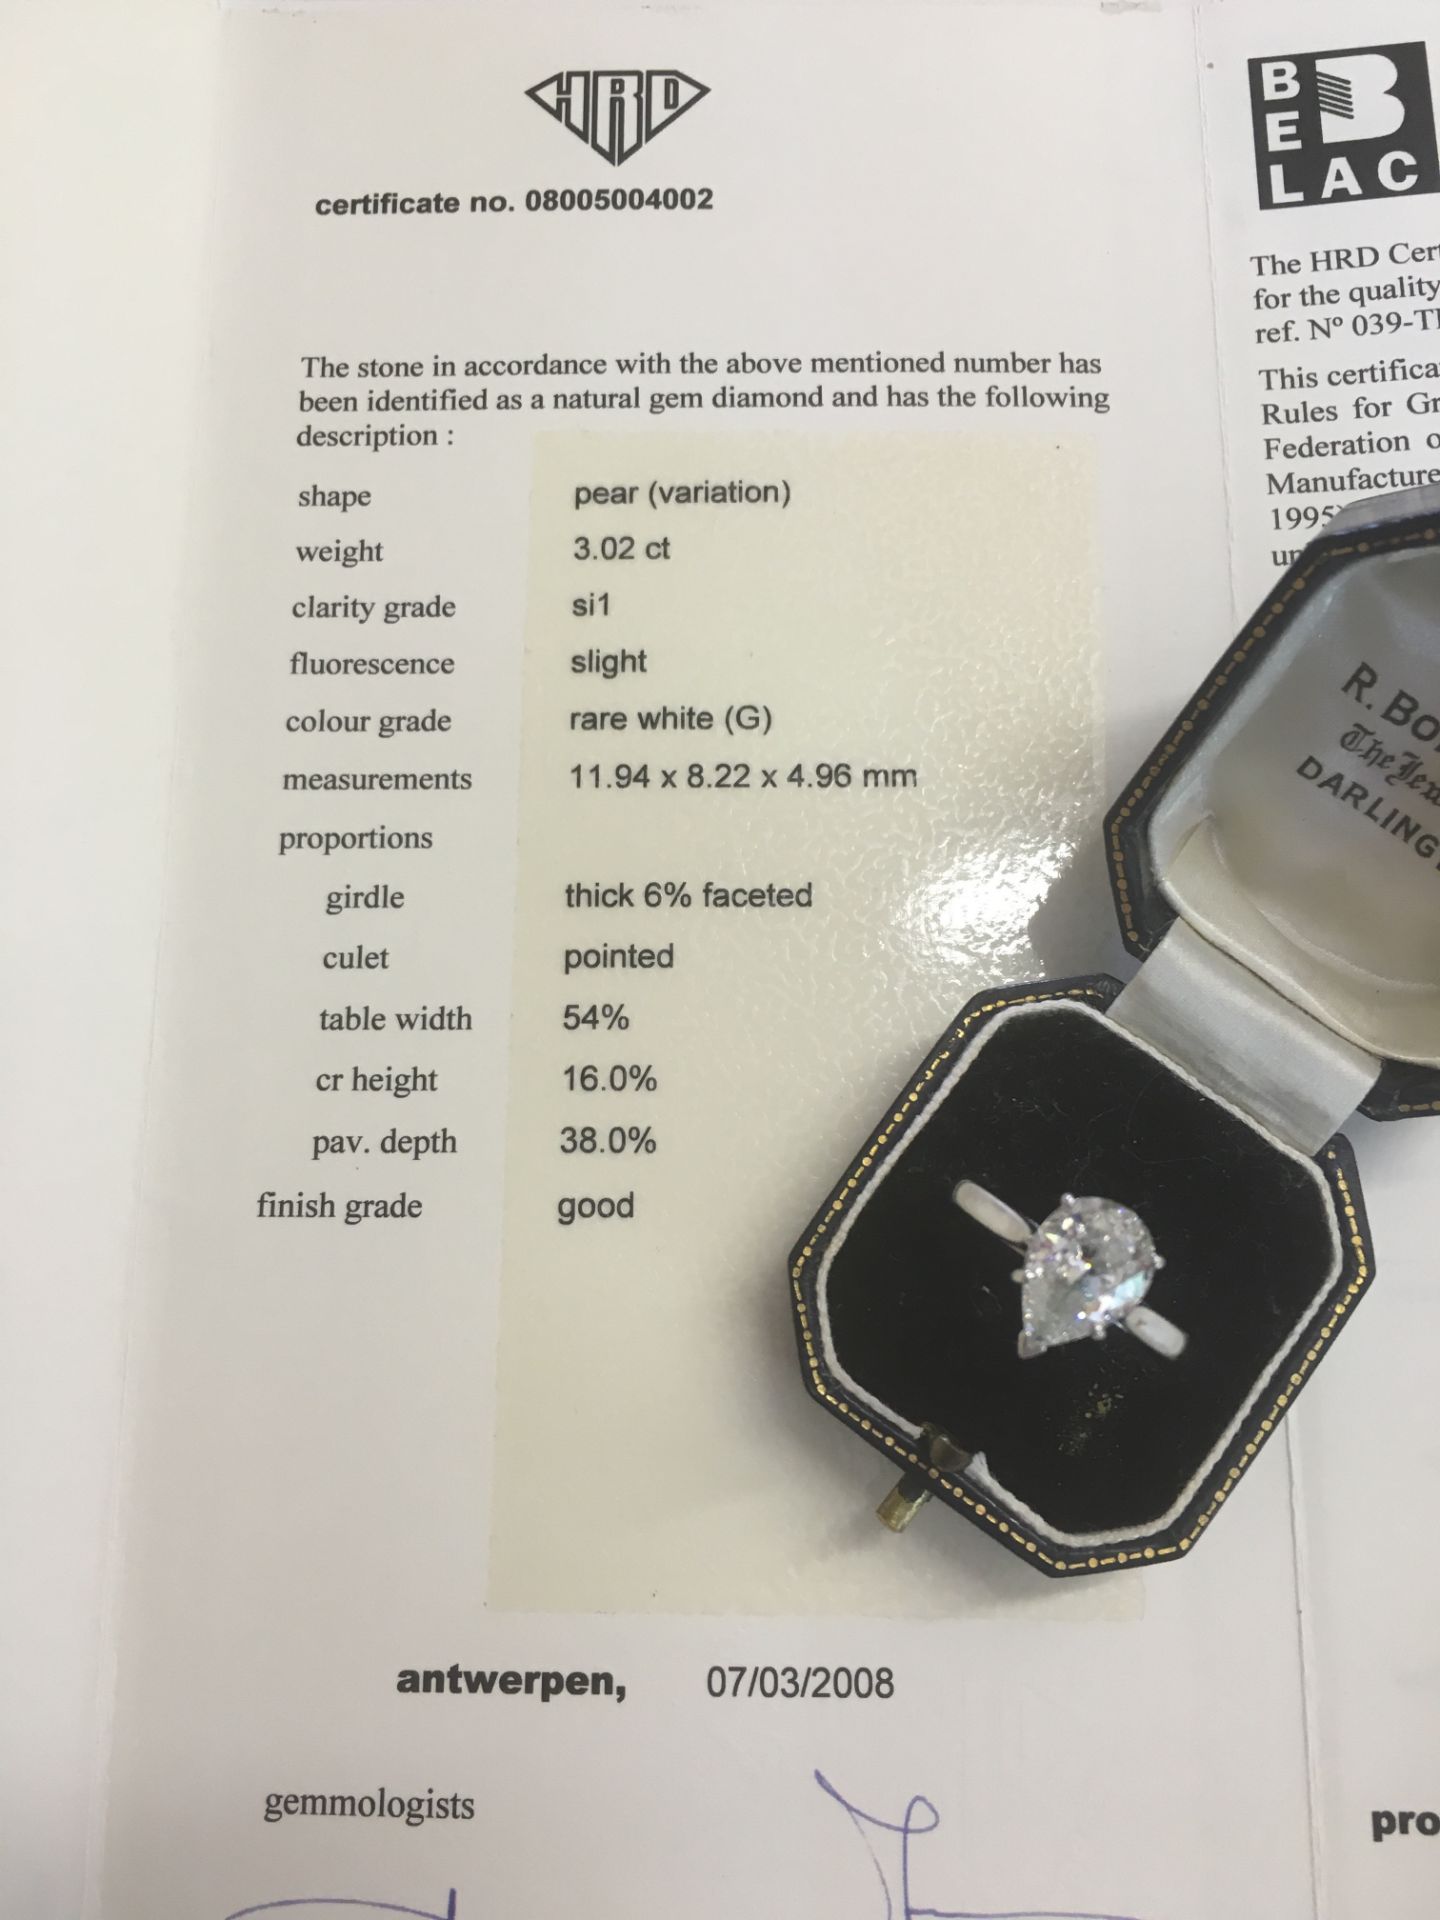 3.02ct PEAR SHAPE DIAMOND SOLITAIRE RING CLARITY: SI1 & COLOUR: RARE WHITE G SET IN PLATINUM - Image 3 of 5